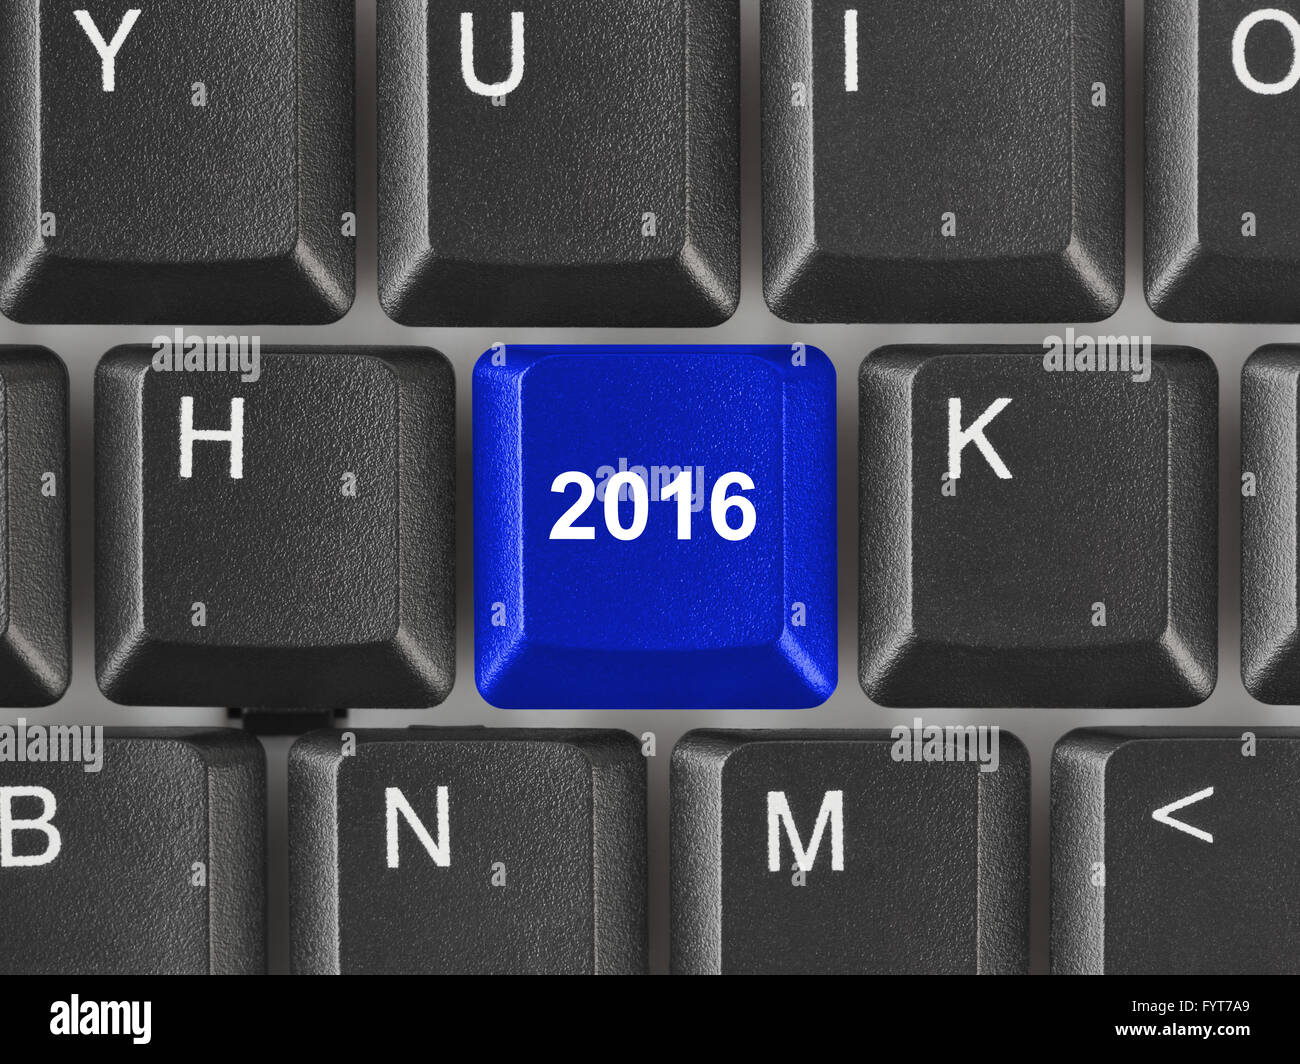 Computer keyboard with 2016 key Stock Photo